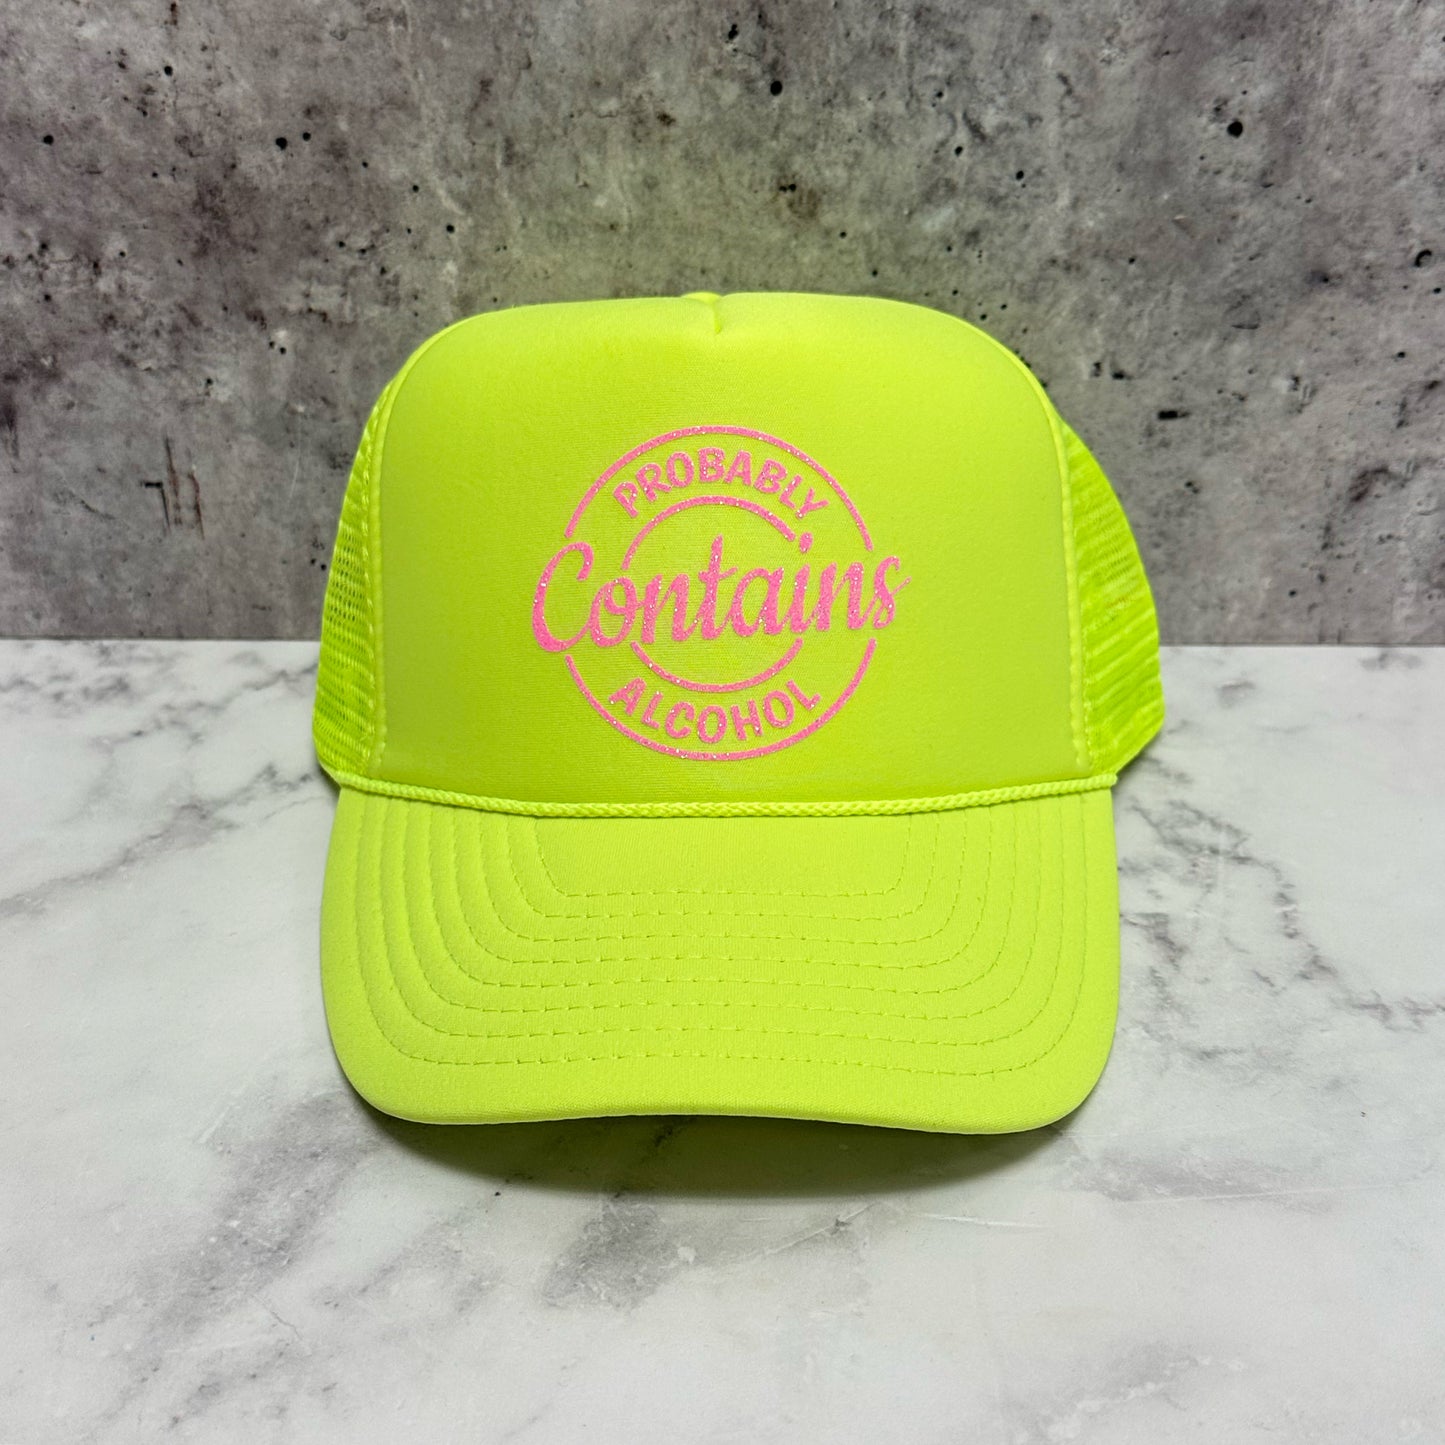 Probably Contains Alcohol Trucker Hat